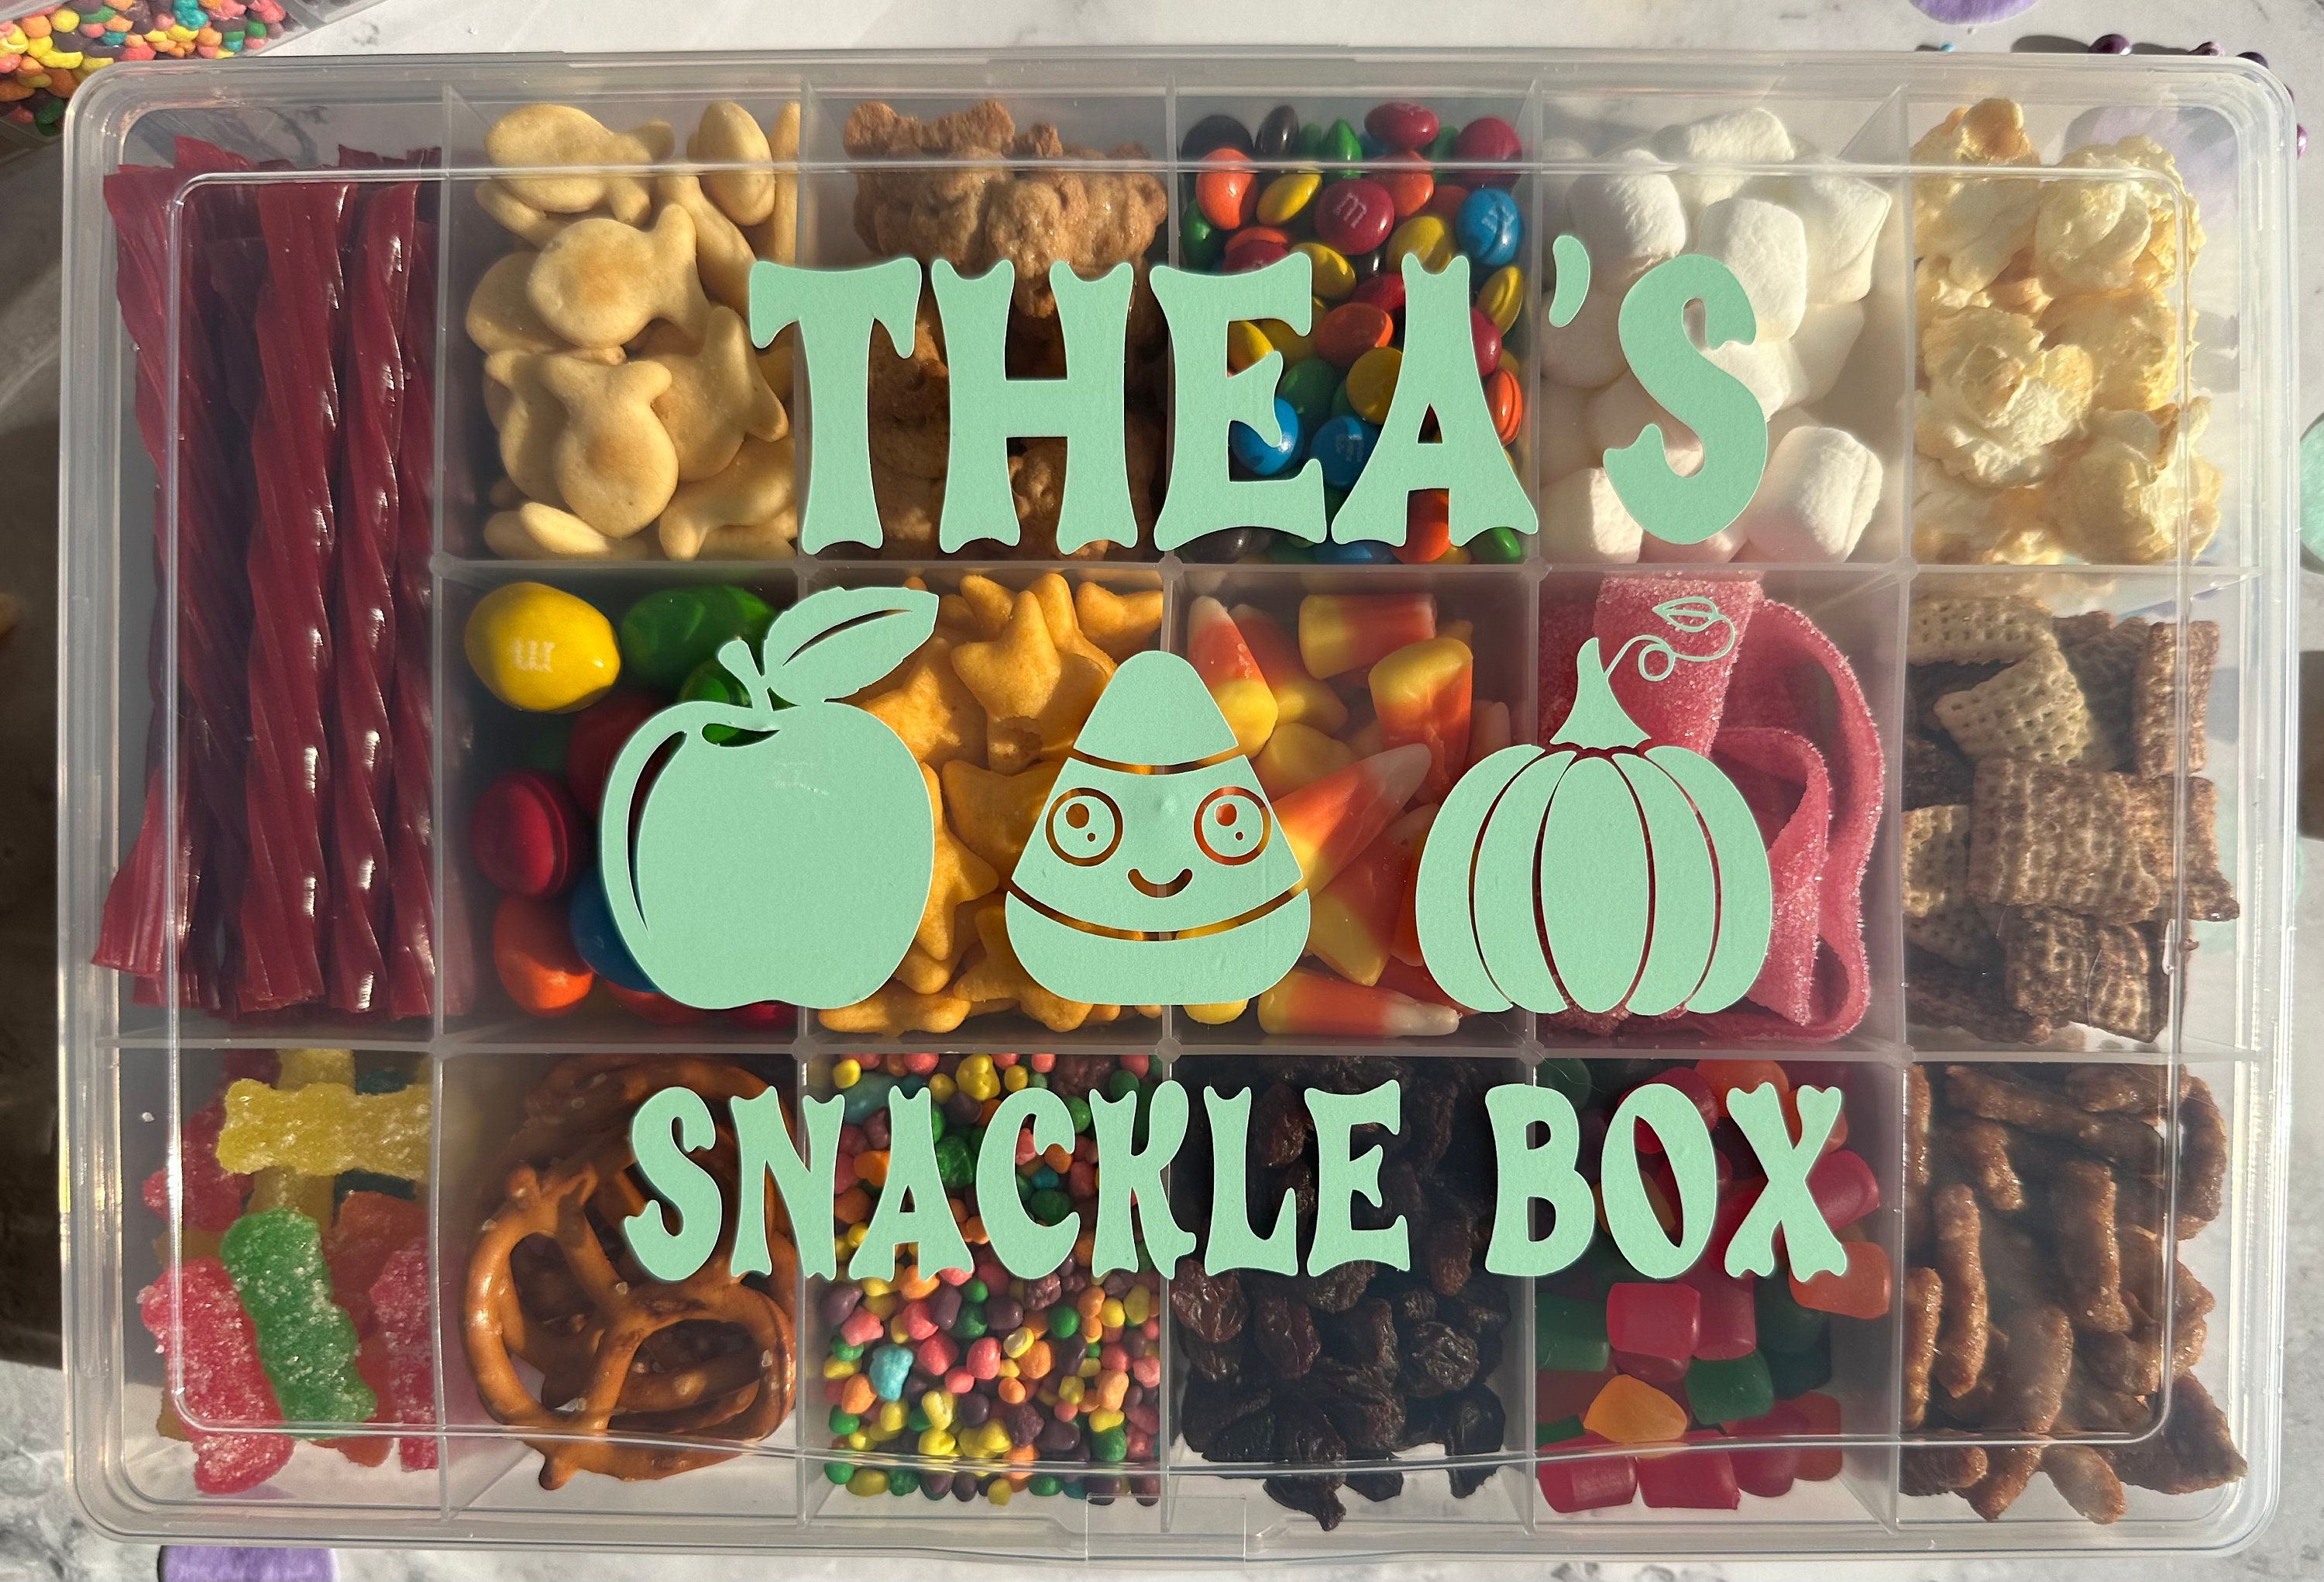 Fall Box, Halloween Box, Personalized Snack Box, Snacklebox, Snackle Box,  Lunch Box, Bento Box, Kids Snack Container, Travel Box, Tackle Box 